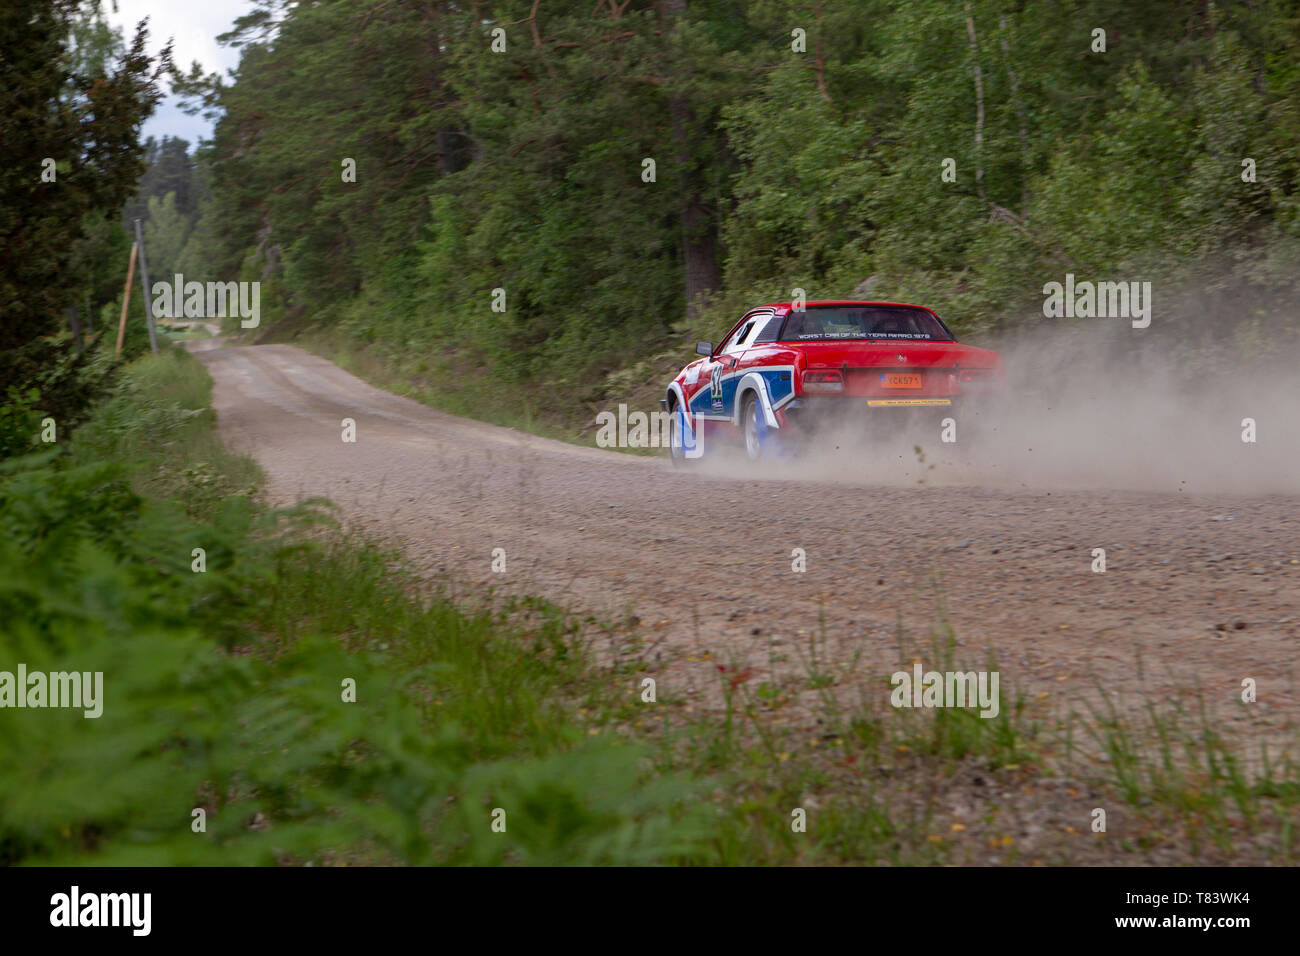 Fast rally car on a dusty dirt road in sweden Stock Photo